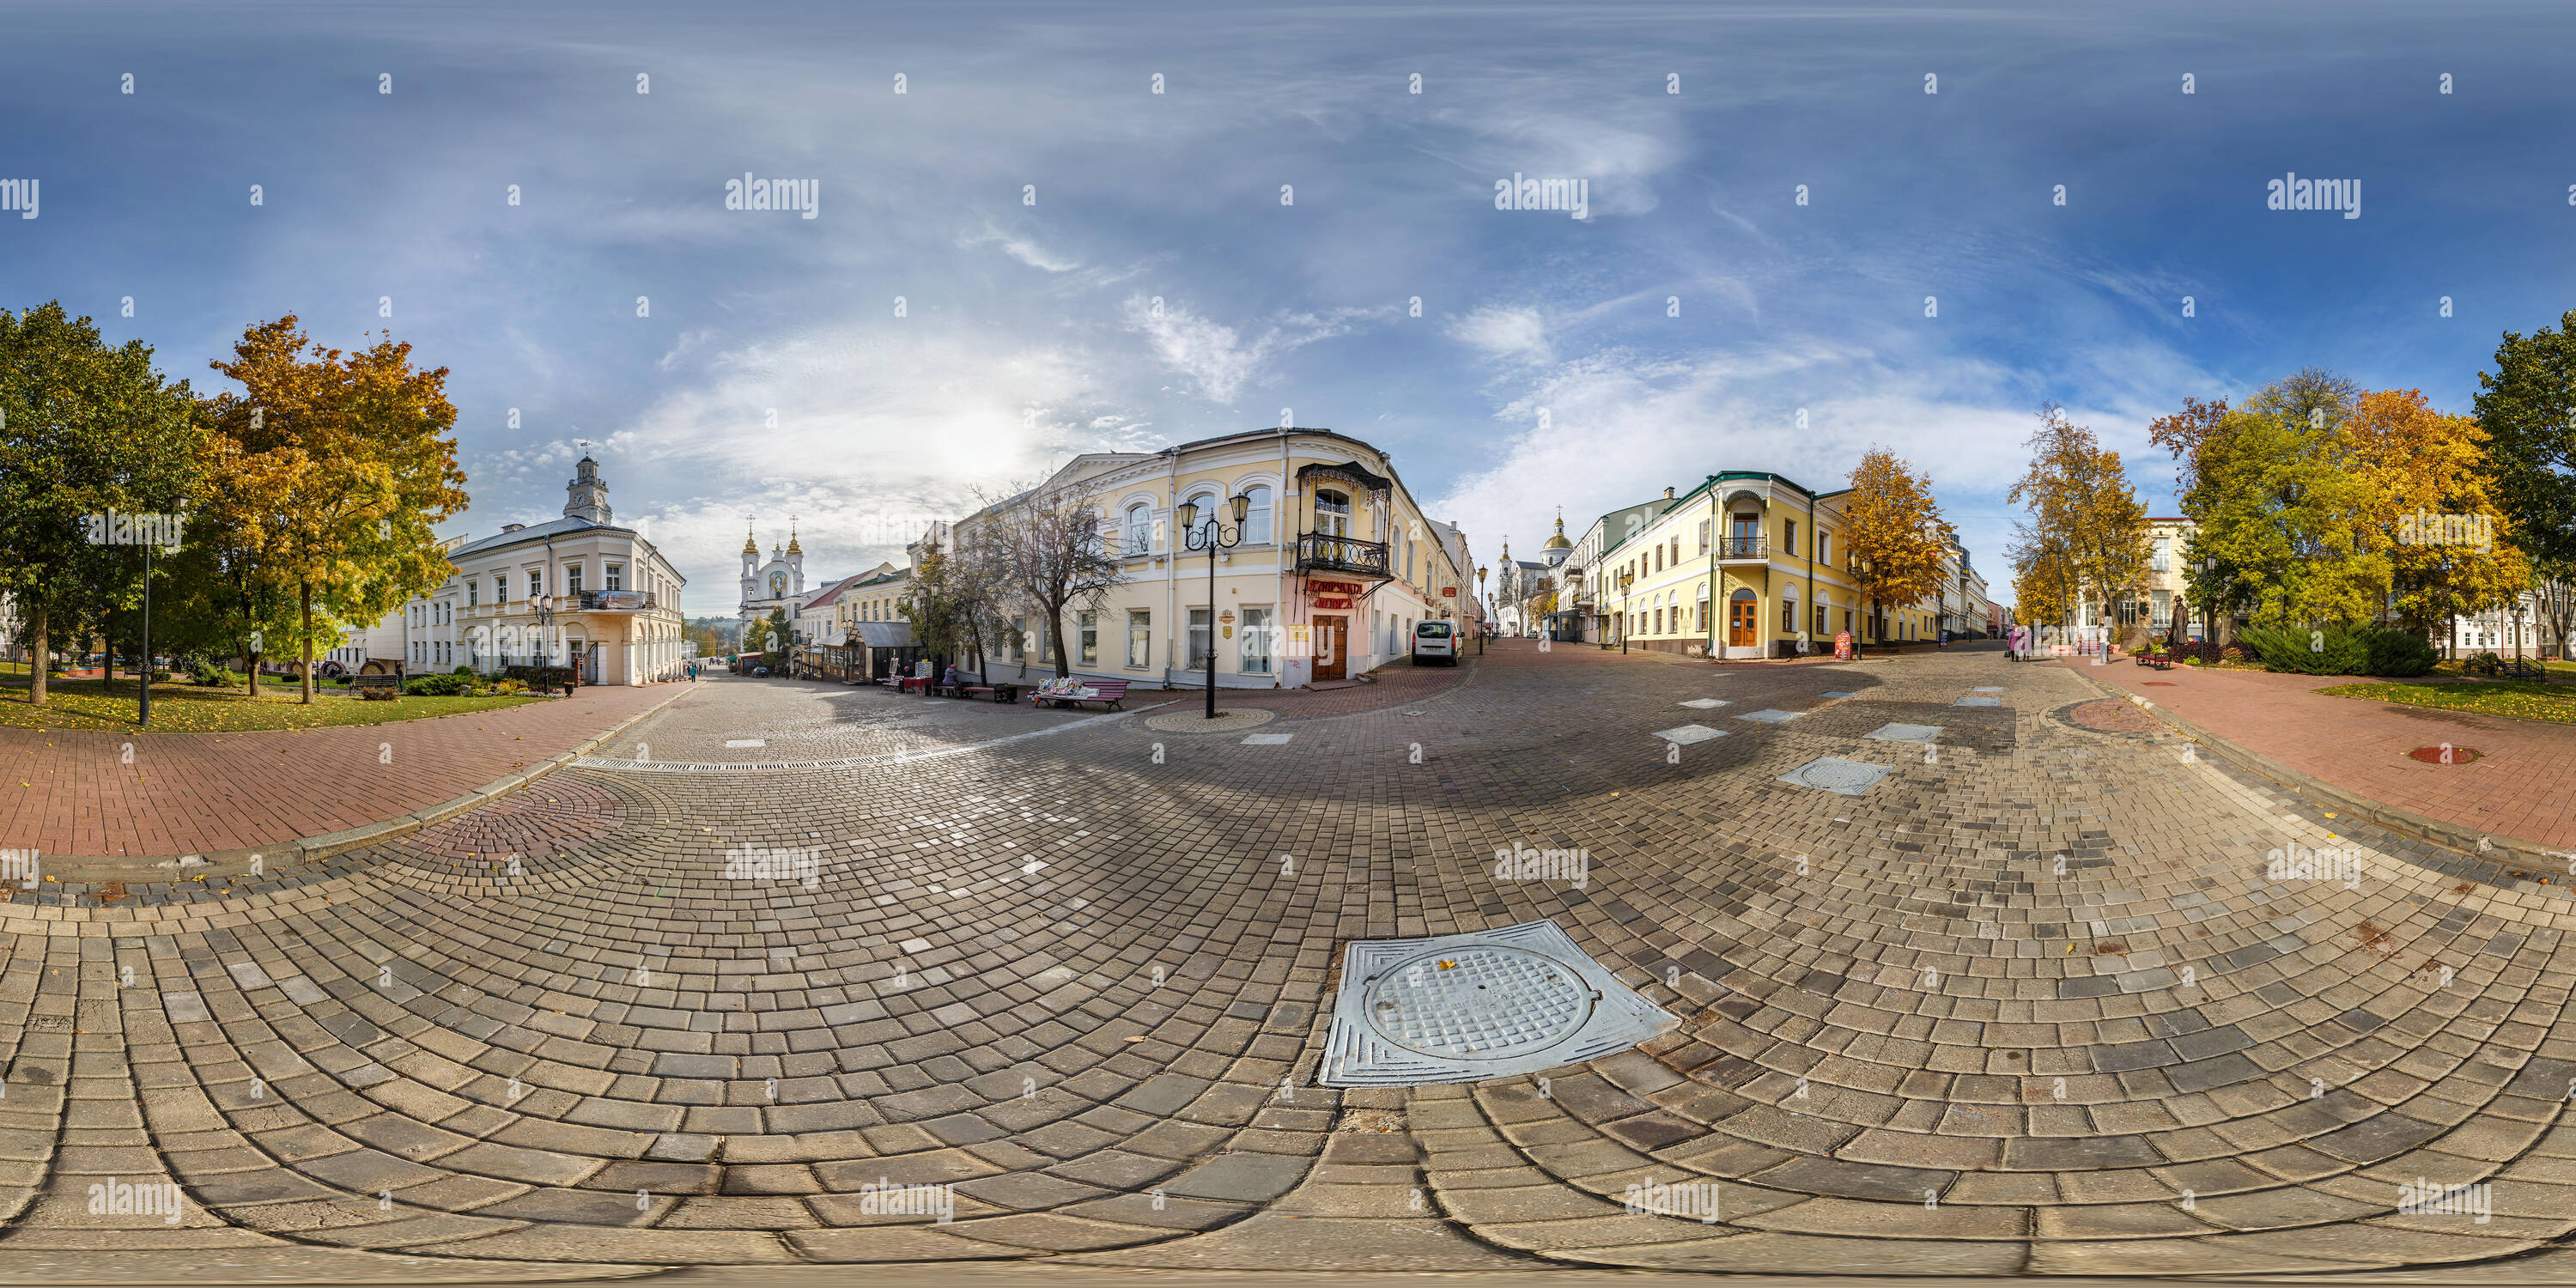 360 degree panoramic view of VITEBSK, BELARUS - OCTOBER, 2018: Full seamless panorama 360 degrees angle view on pedestrian street place of old tourist town in equirectangular proj